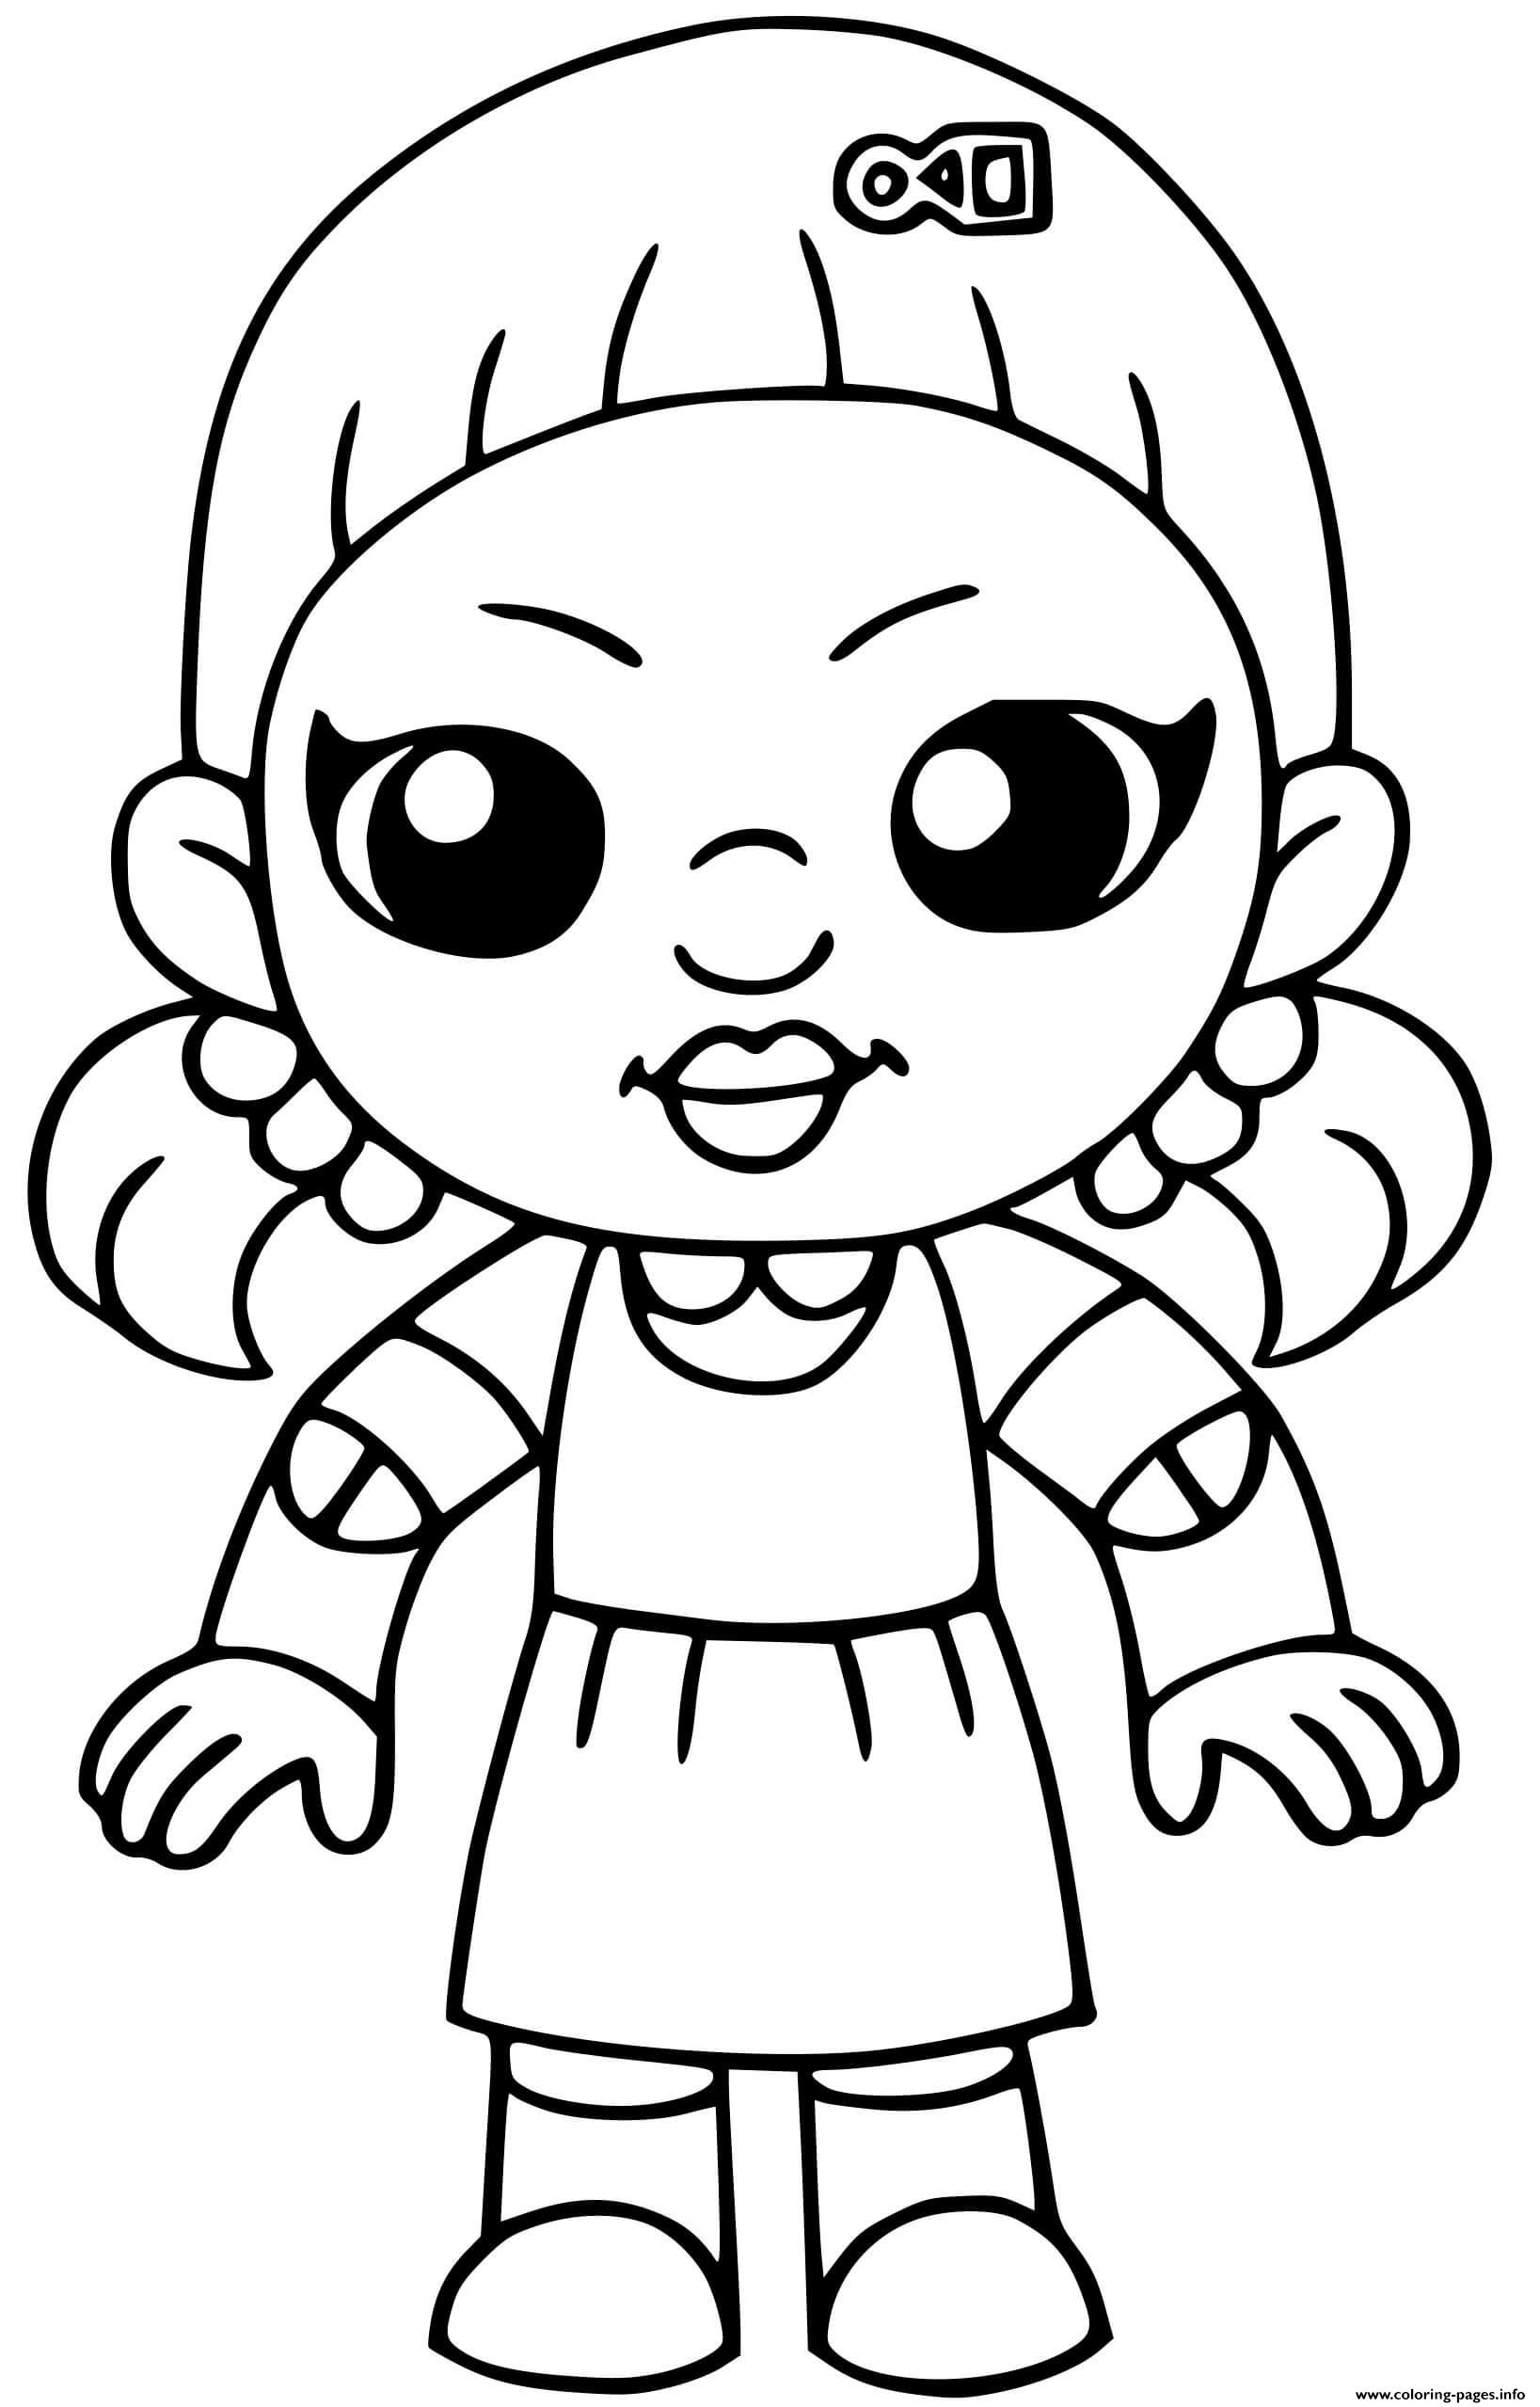 Gamer Coloring Pages - Coloring Home